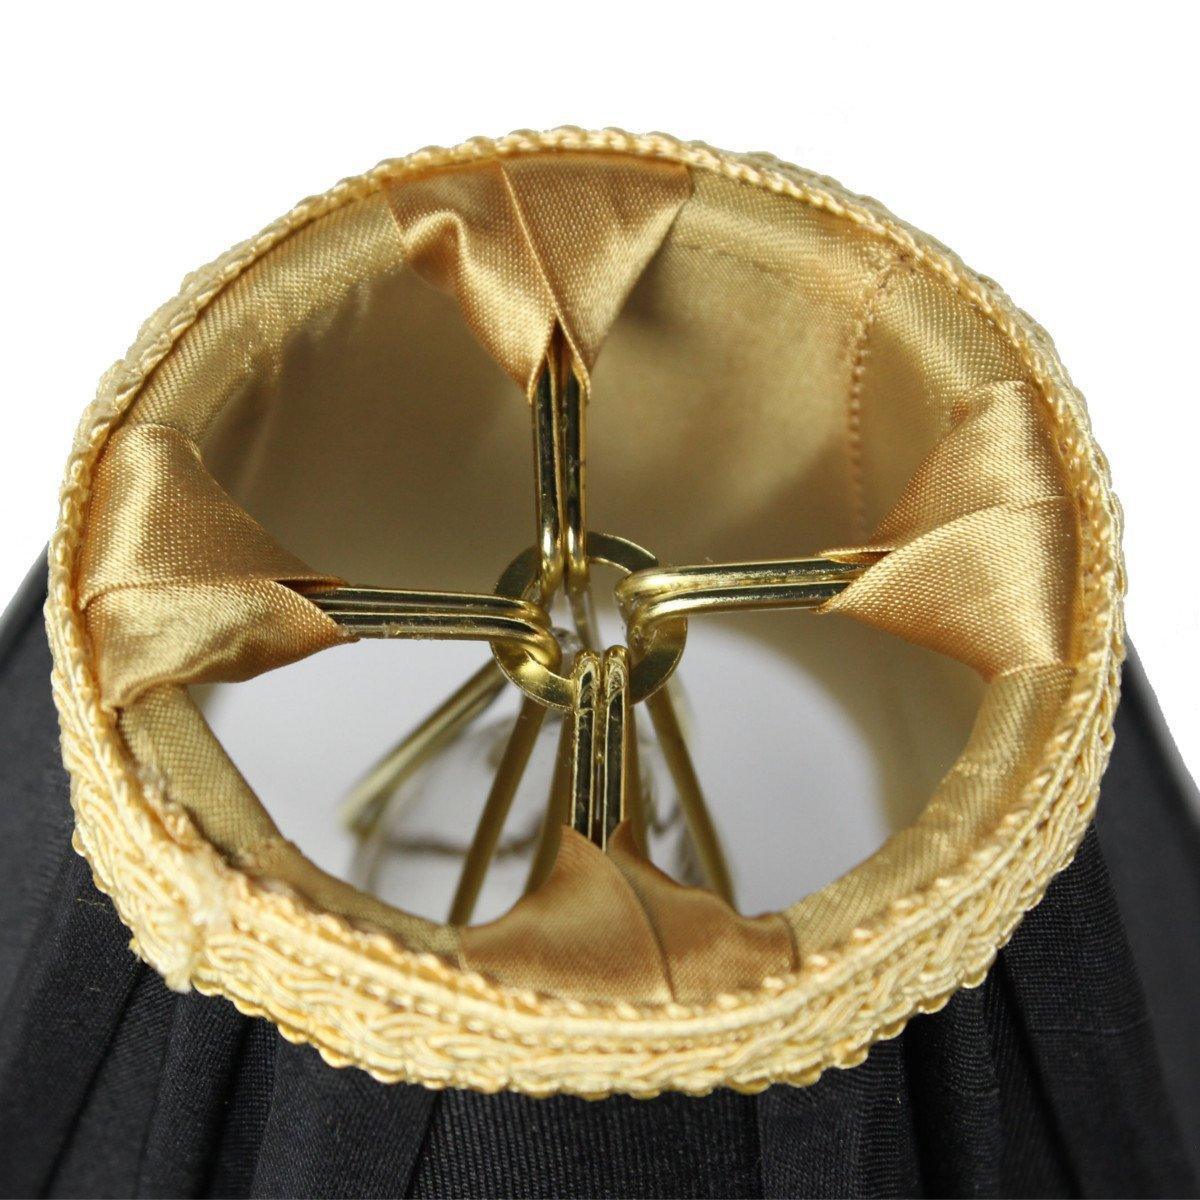 Set of 6 Black with Gold Liner Chandelier Clip-On Lampshades - Specialty Shades